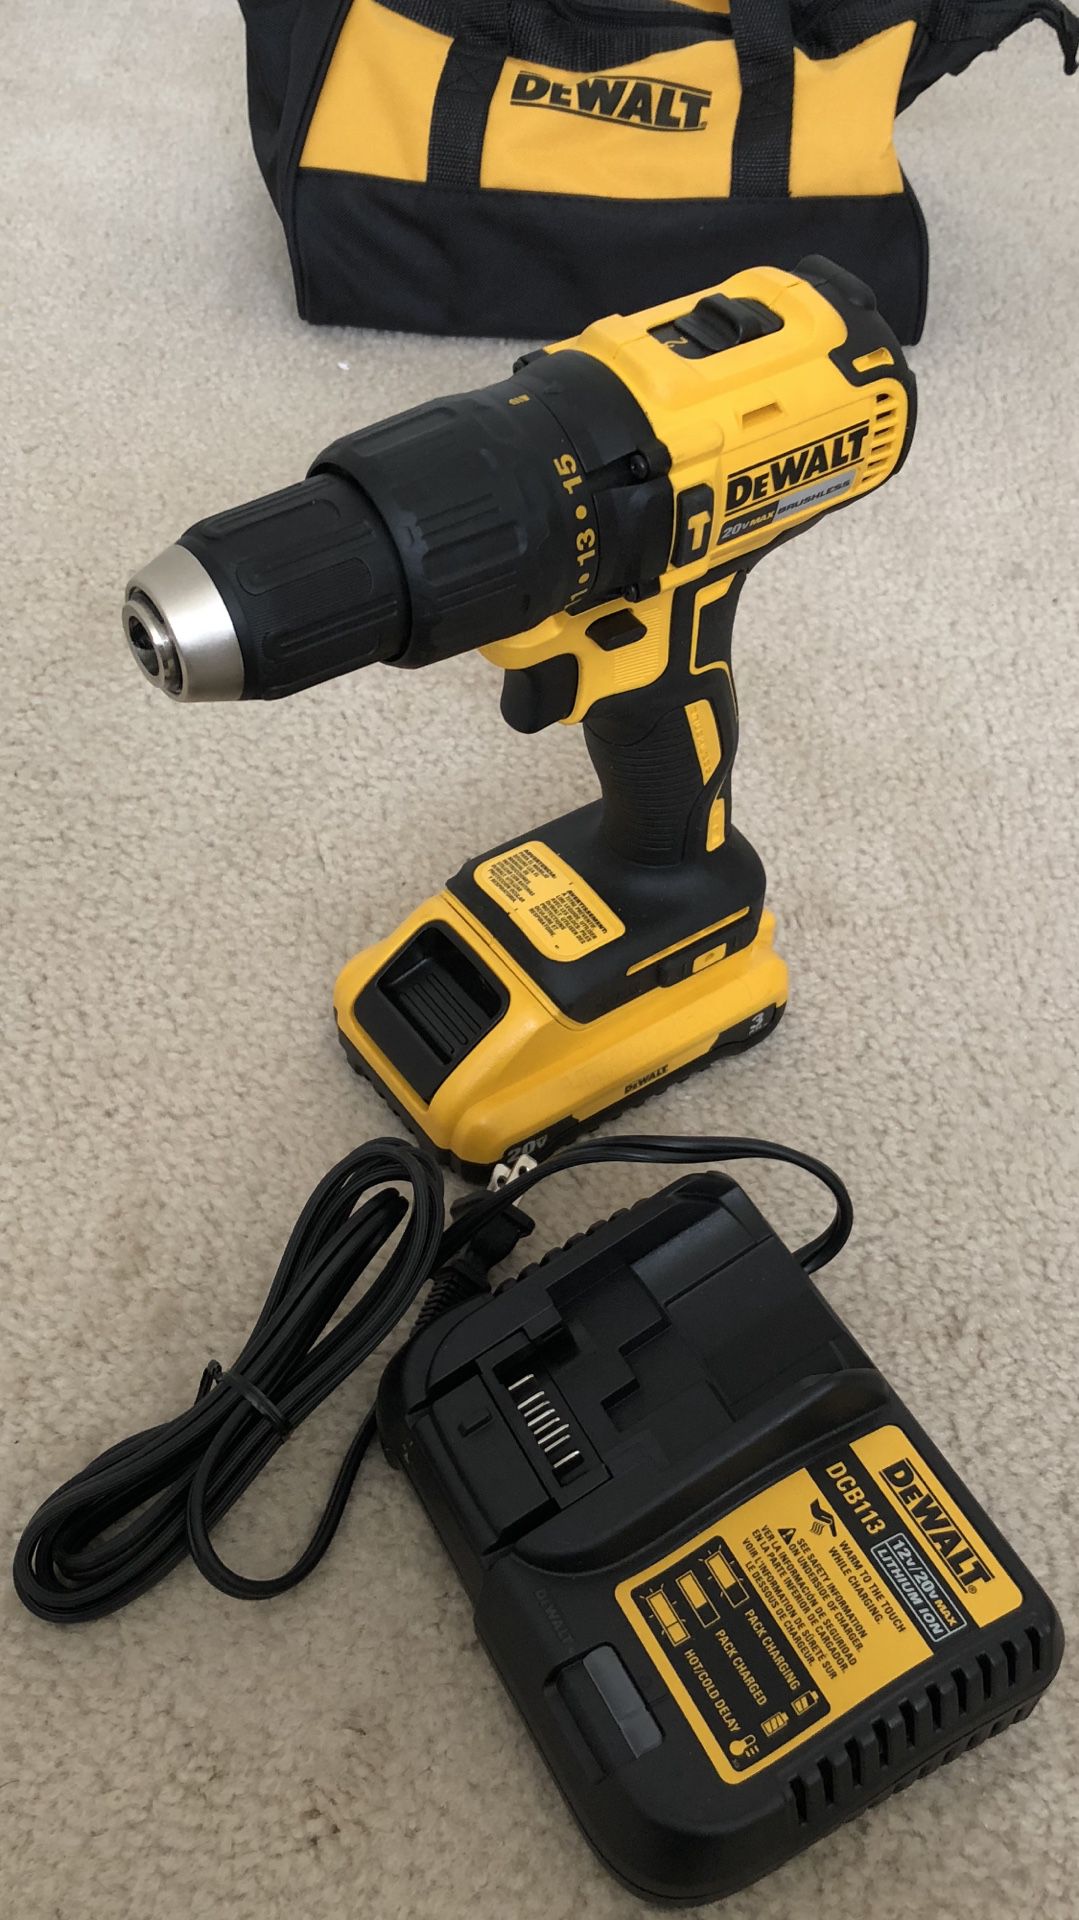 DeWalt 20-Volt Brushless Hammer Drill with Battery, Charger and Tool Bag